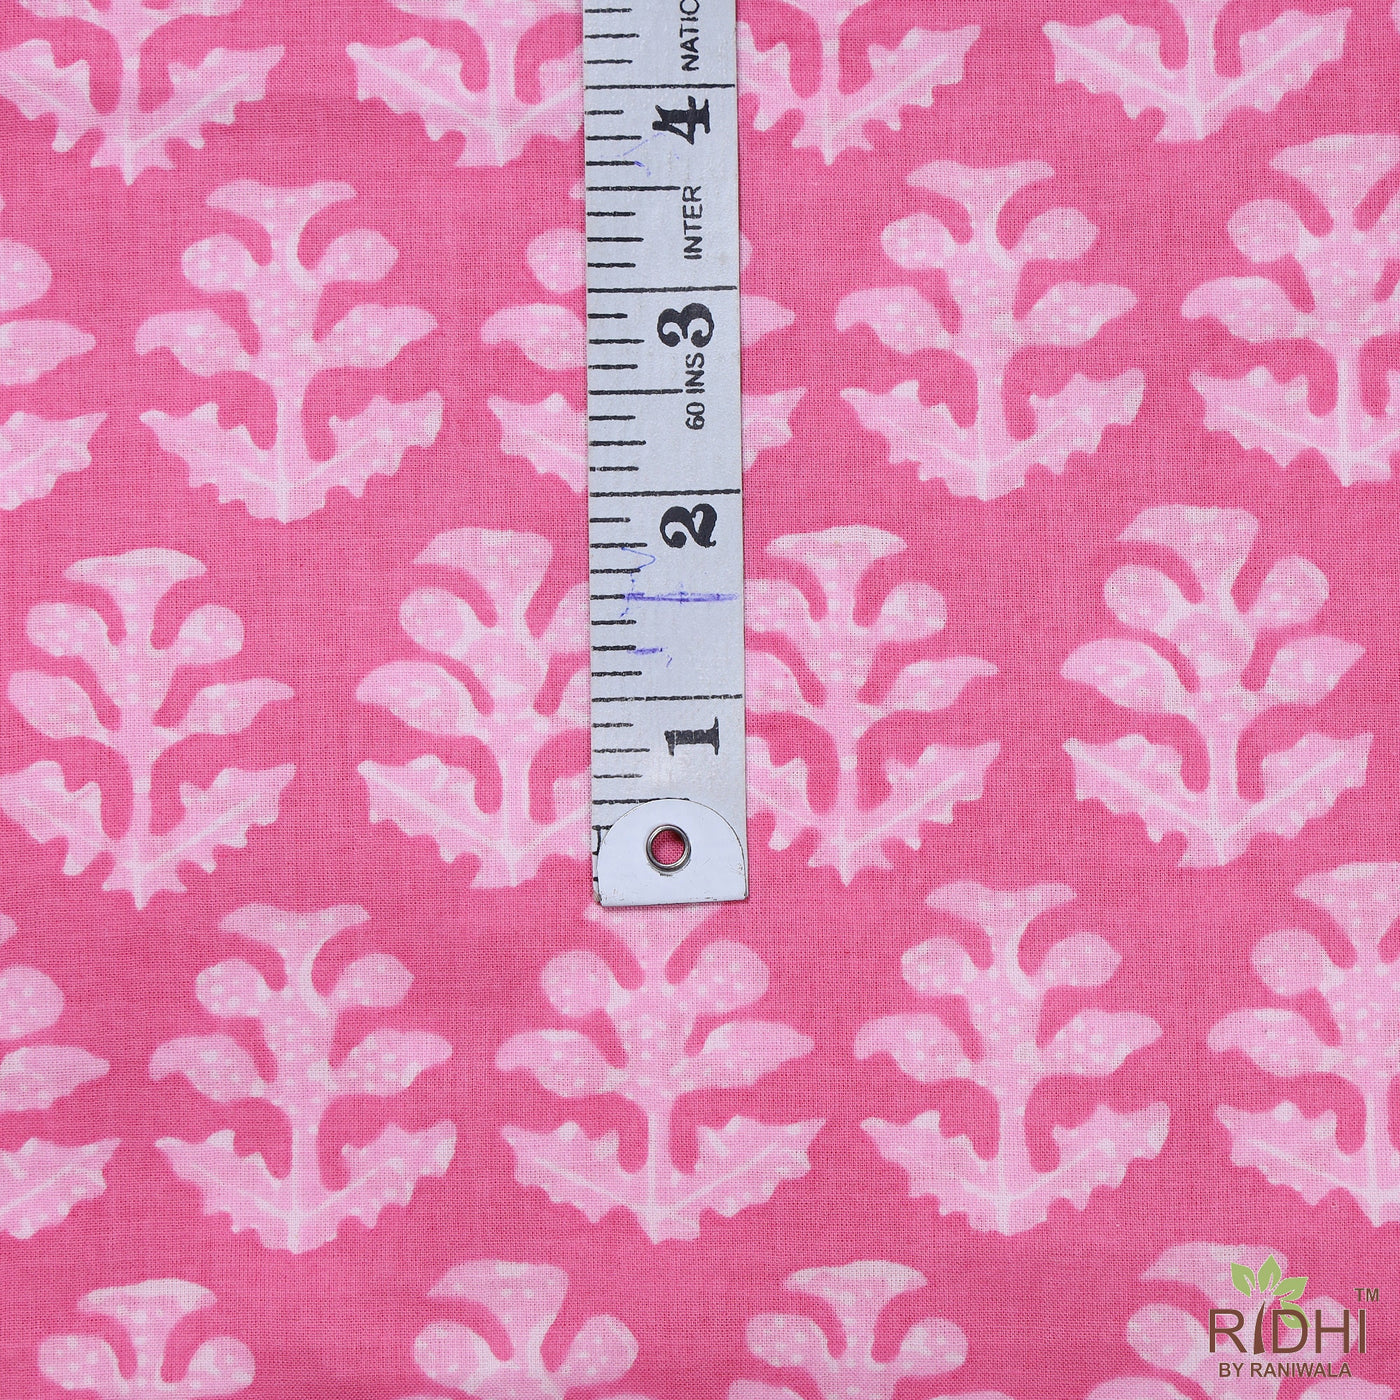 Fabricrush Watermelon and Lemonade Pink Indian Floral Printed 100% Pure Cotton Cloth, Fabric by the yard, Womens clothing curtains Pillows Cushions Bag